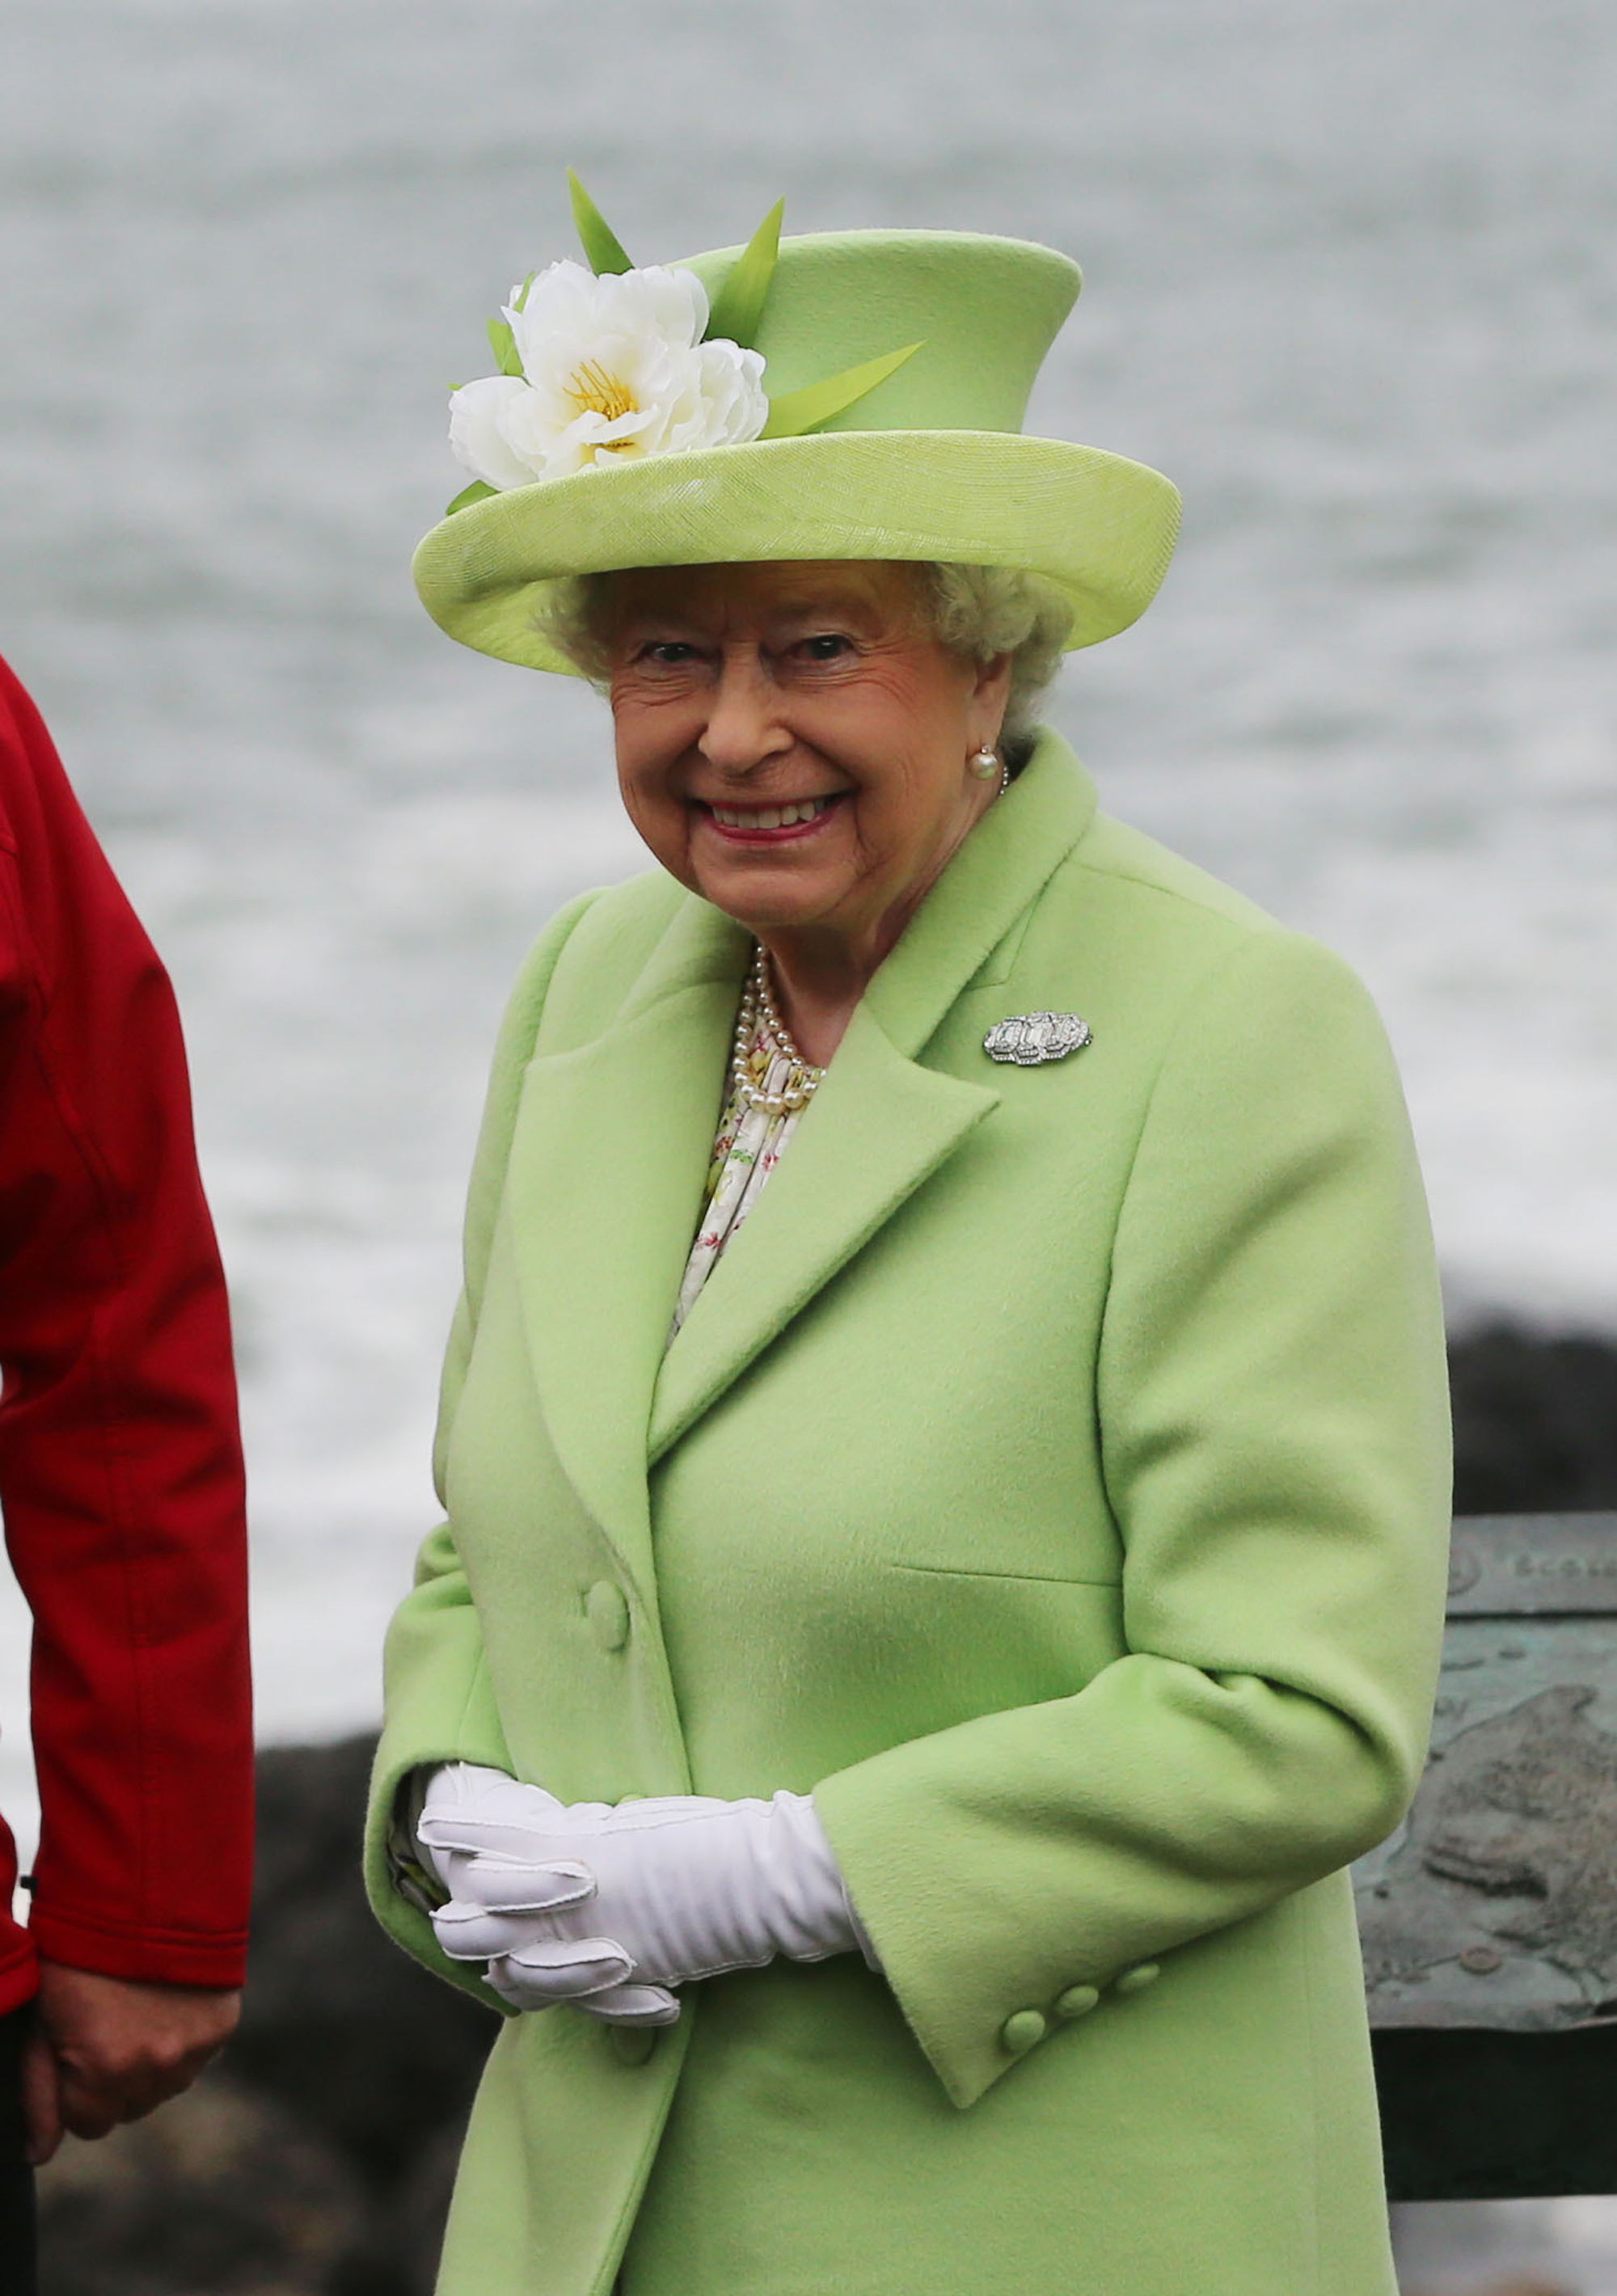 The Queen during a visit to Northern Ireland to mark her 90th birthday in 2016